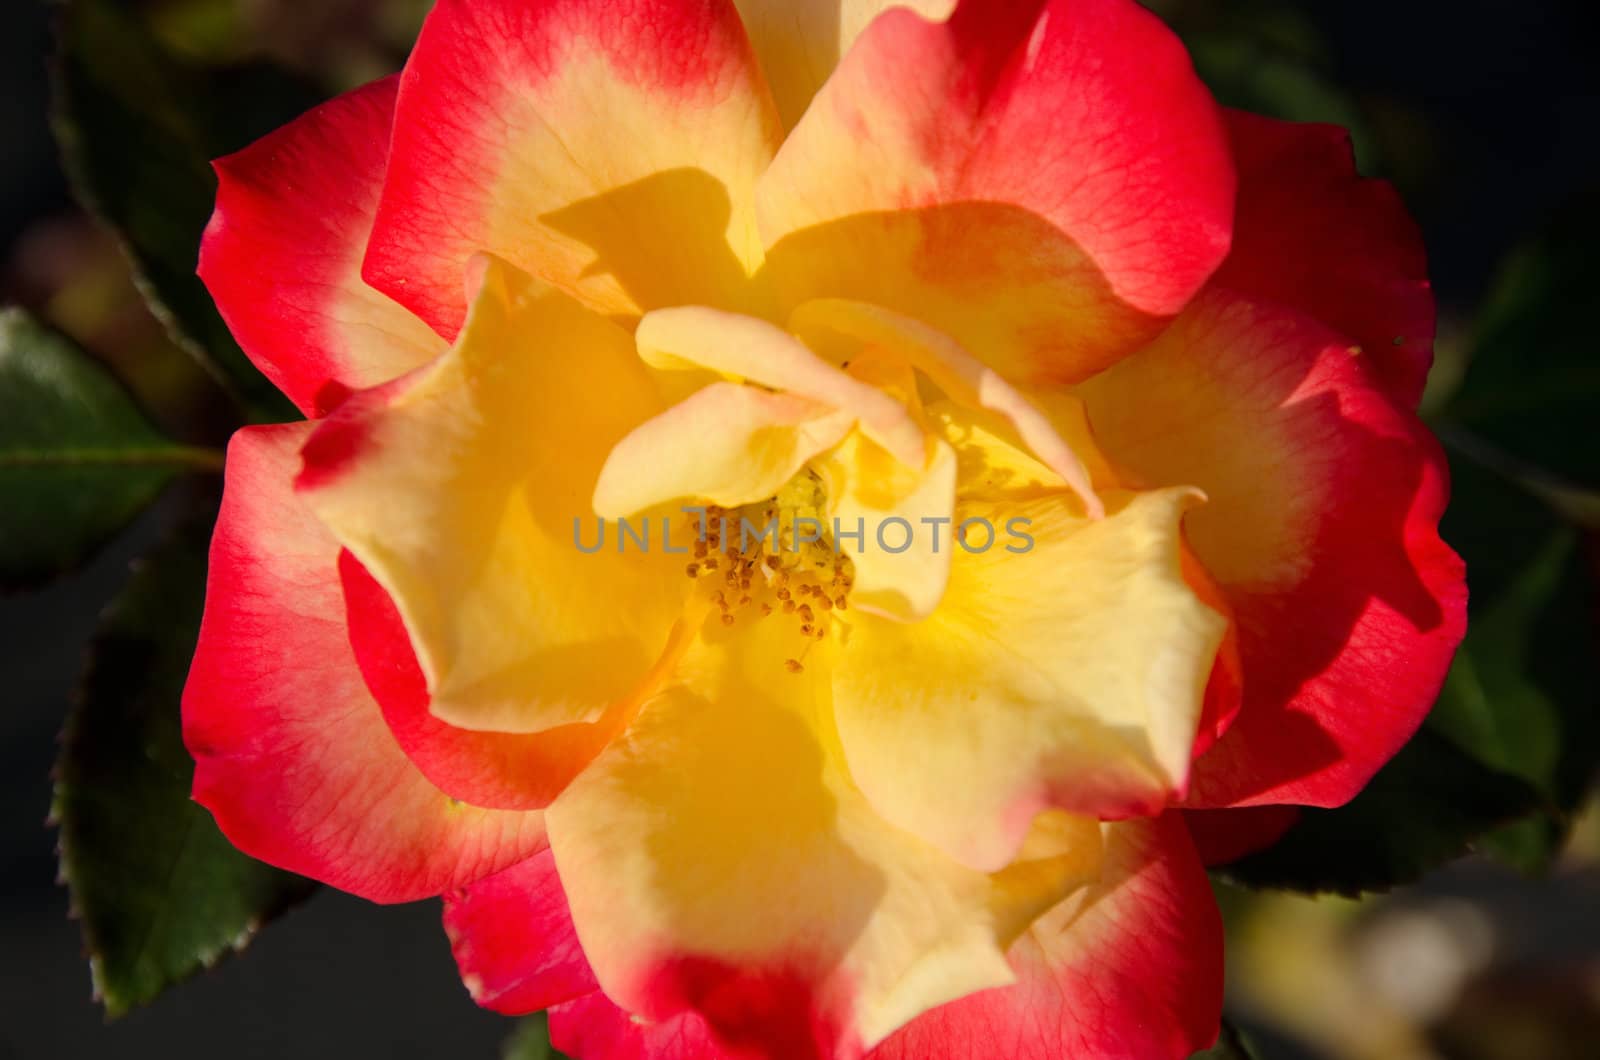 Detail of a yellow and red rose flower in daylight